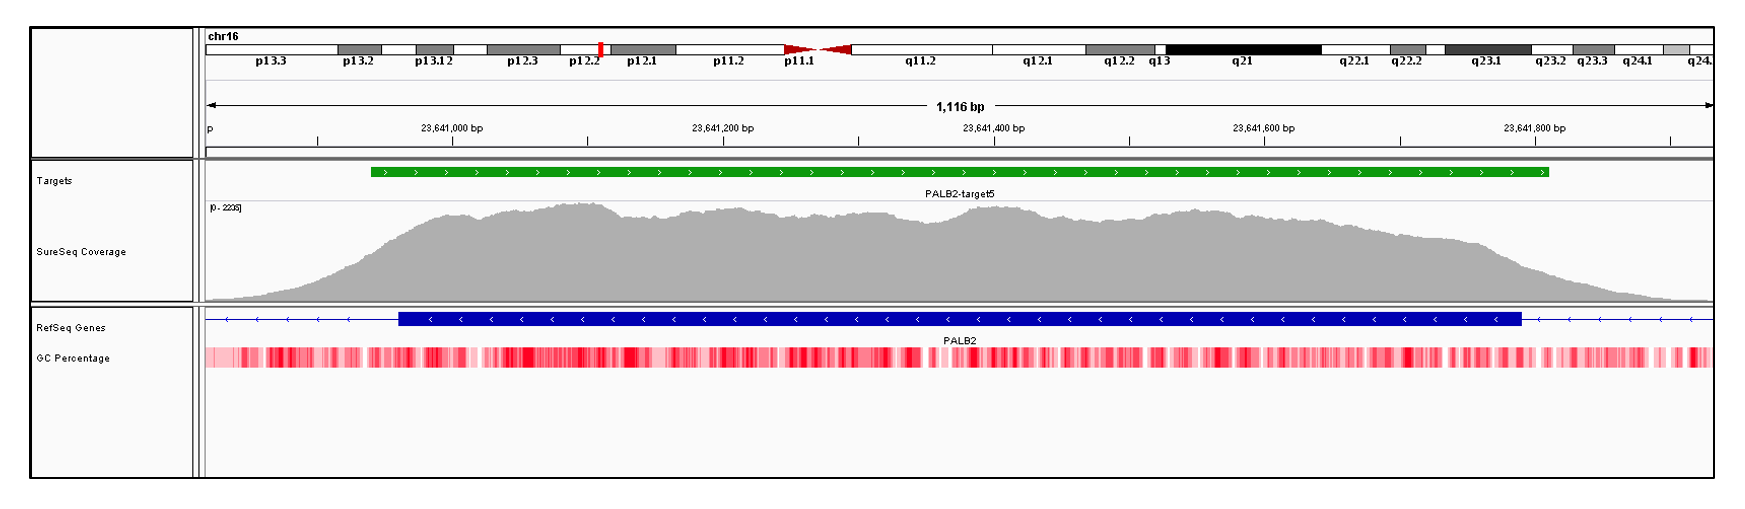 PALB2 Exon 5 (hg19 chr16:23640961-23641790). Depth of coverage per base (grey). Targeted region (green). Gene coding region as defined by RefSeq (blue). GC percentage (red). Image